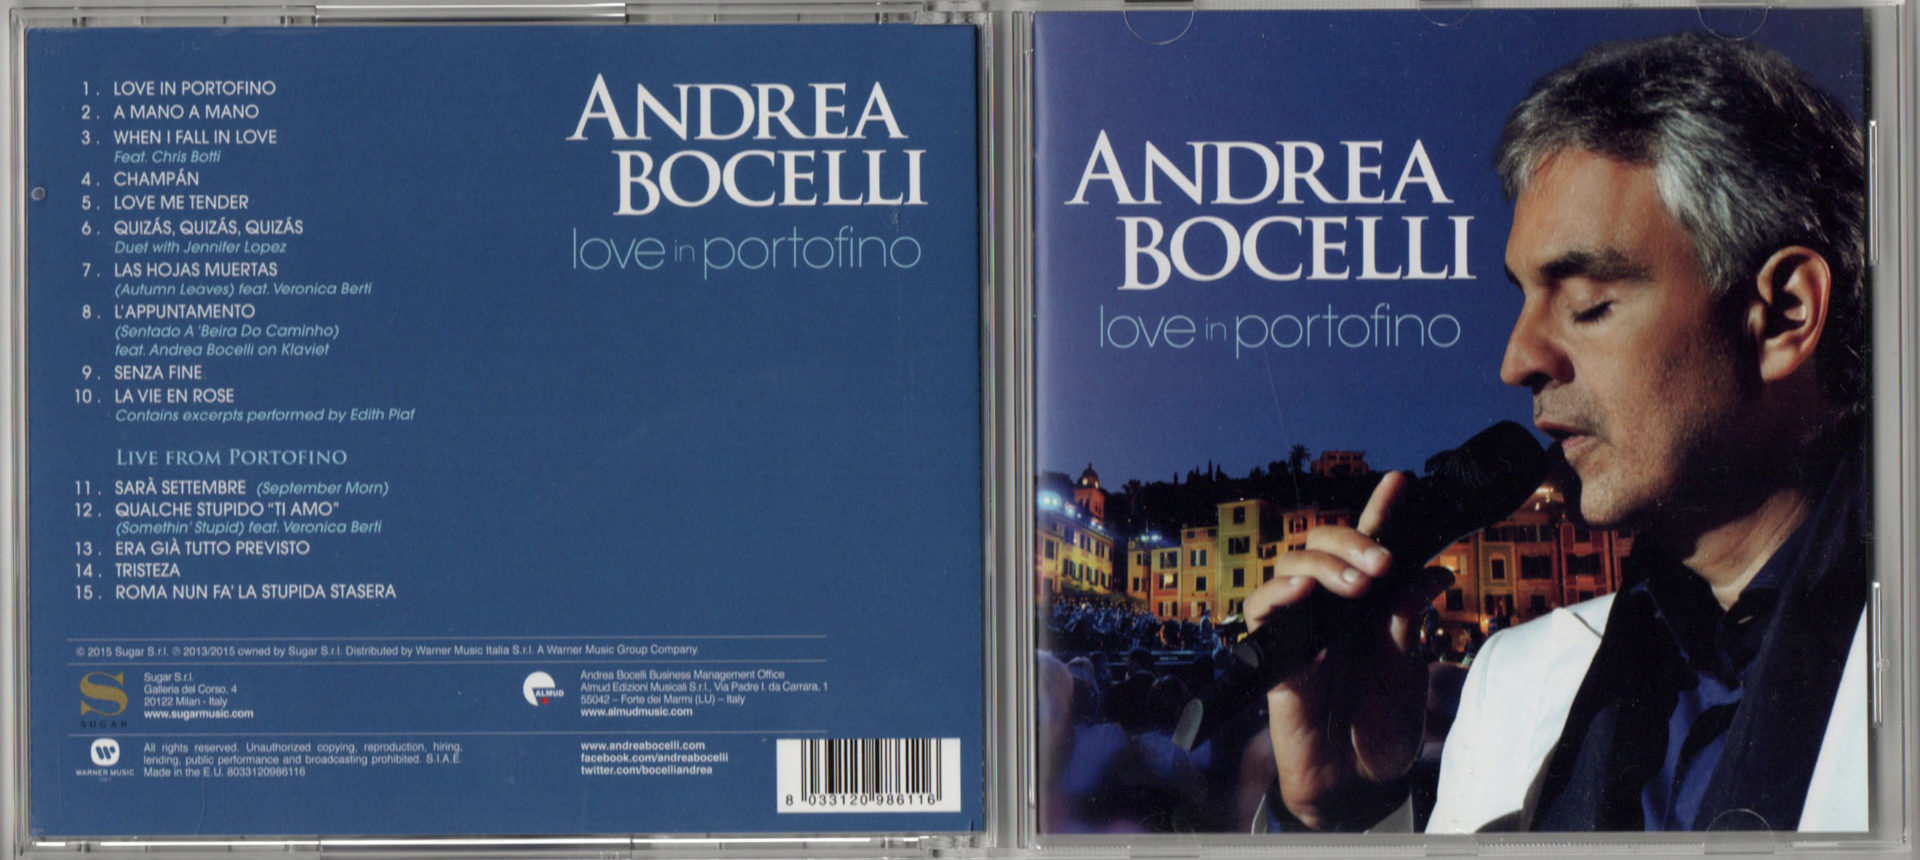 Andrea Bocelli & his son Amos (on piano) - Love Me Tender - live on  German TV, April 13, 2013 